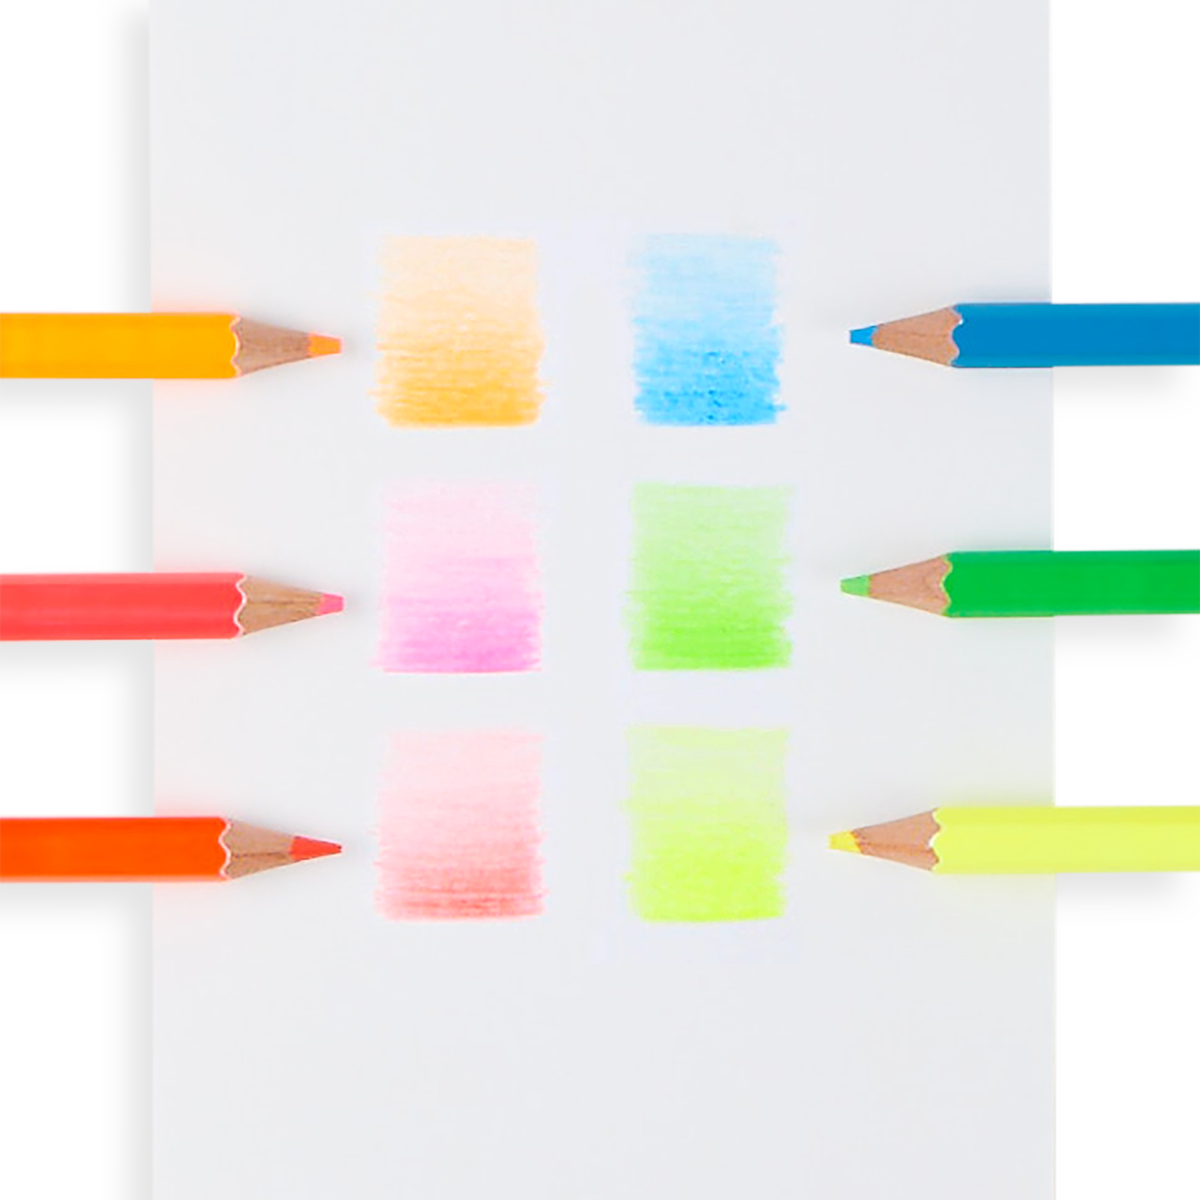 Ooly Jumbo Brights Neon Colored Pencils - Set of 6